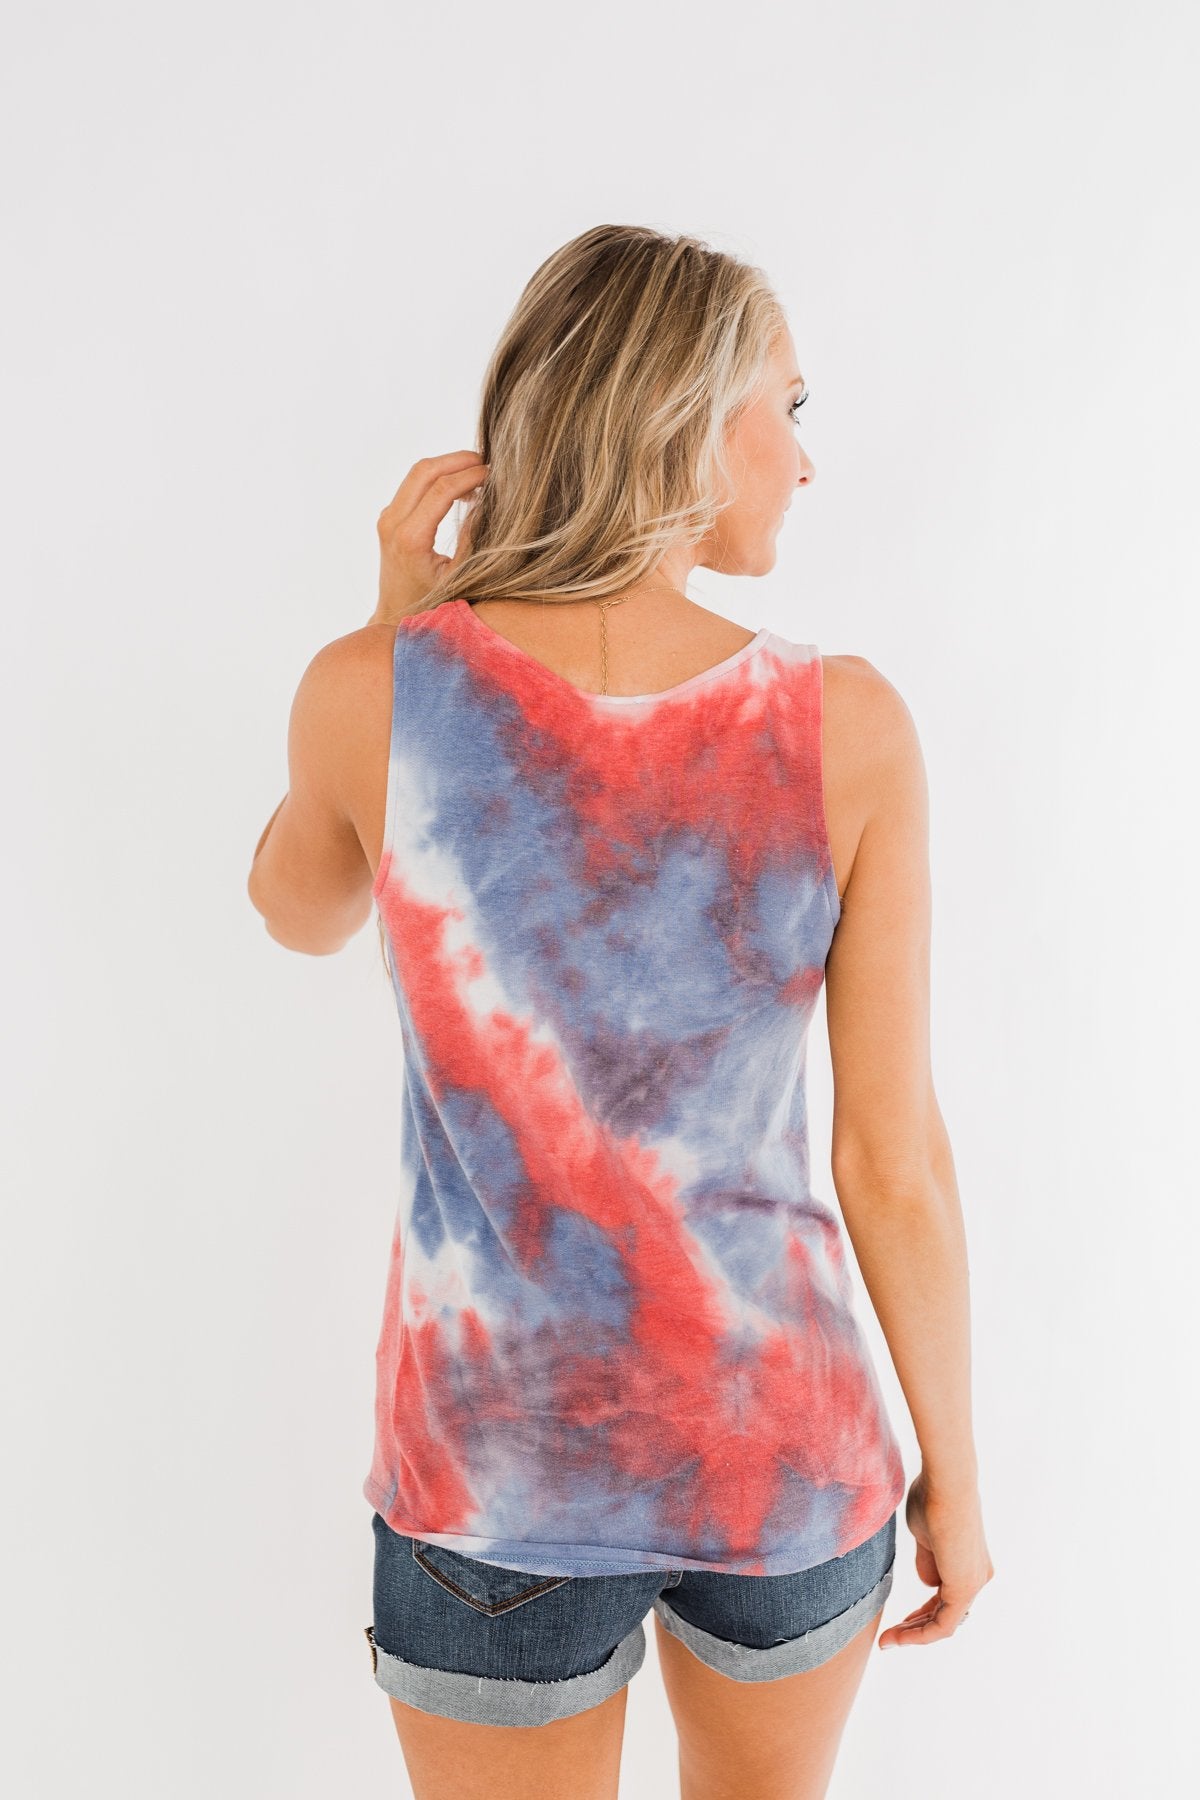 Tie Dye Criss-Cross Tank- Red, White, & Blue – The Pulse Boutique